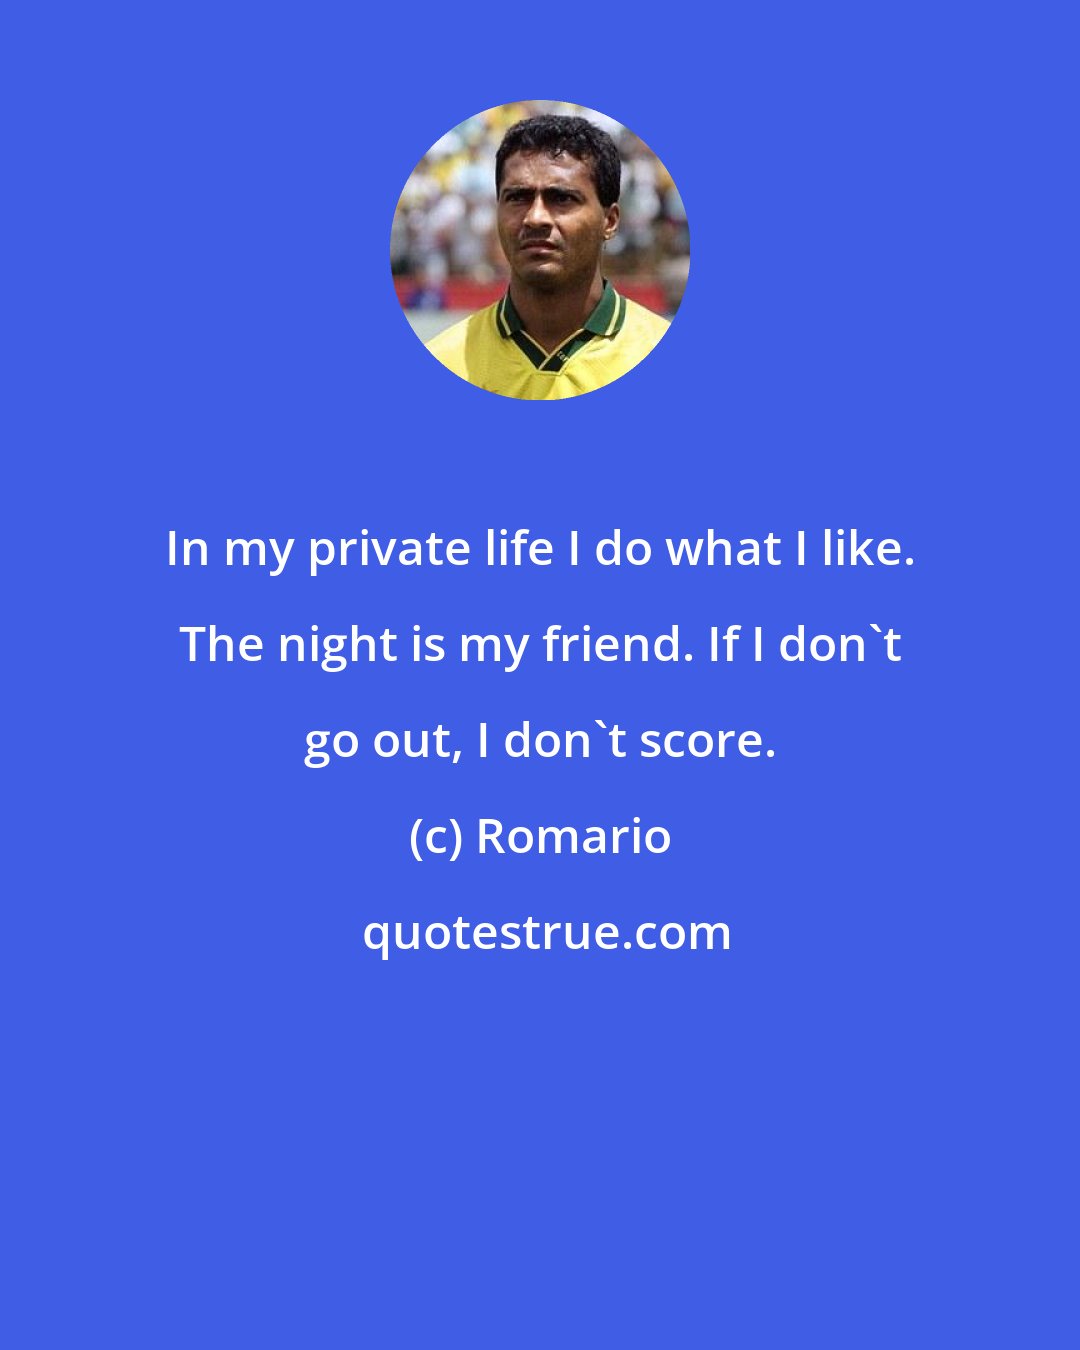 Romario: In my private life I do what I like. The night is my friend. If I don't go out, I don't score.